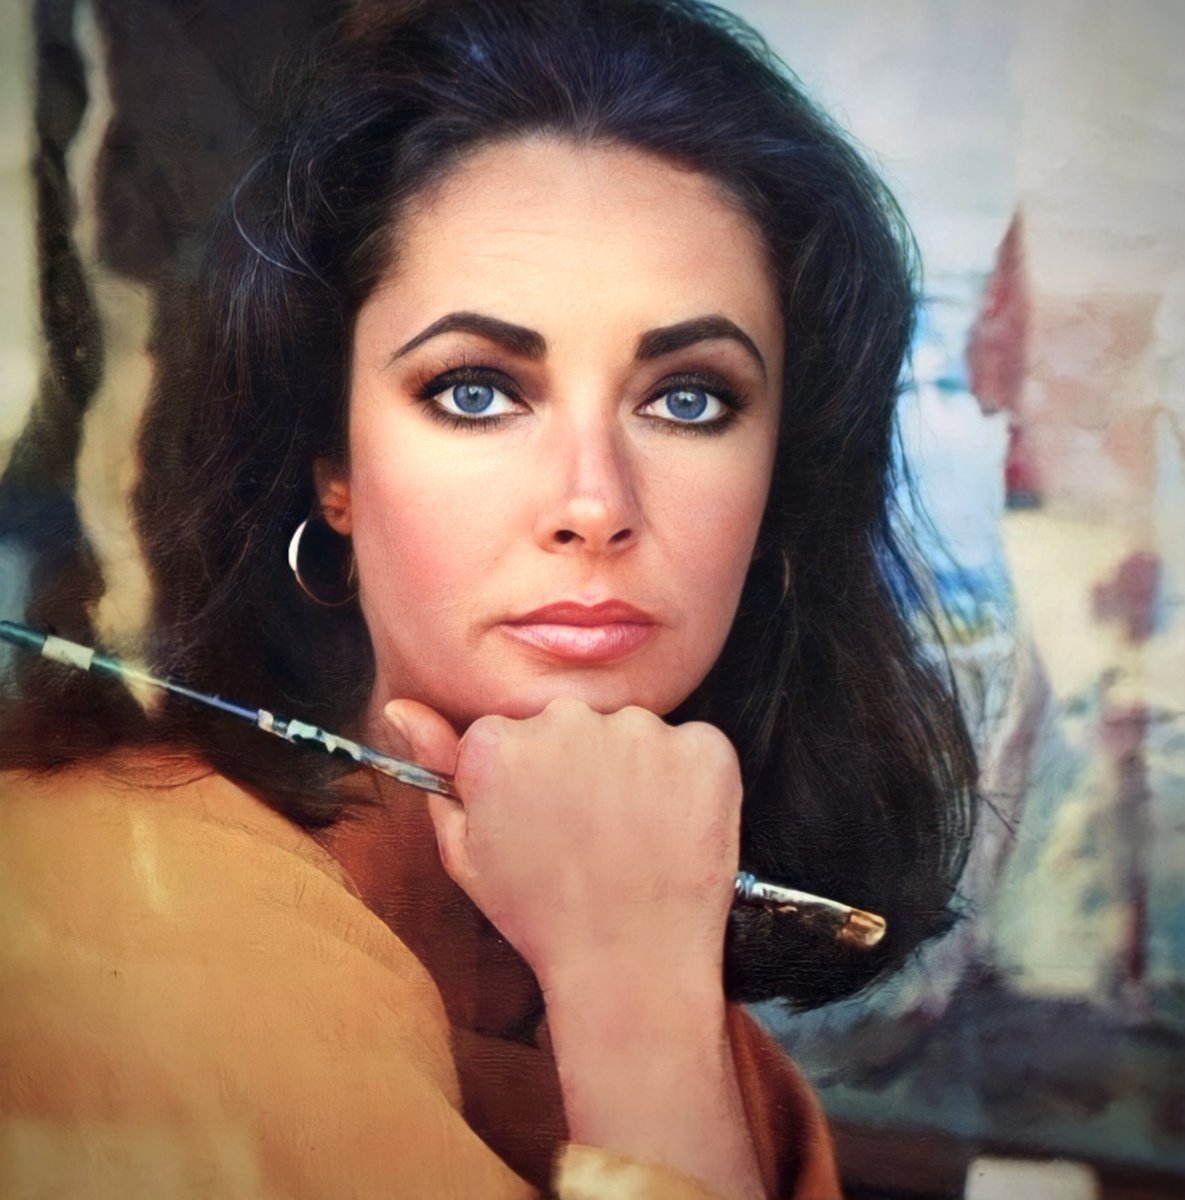 Scrolling by a photo of Elizabeth Taylor never fails to put some pep in my step.